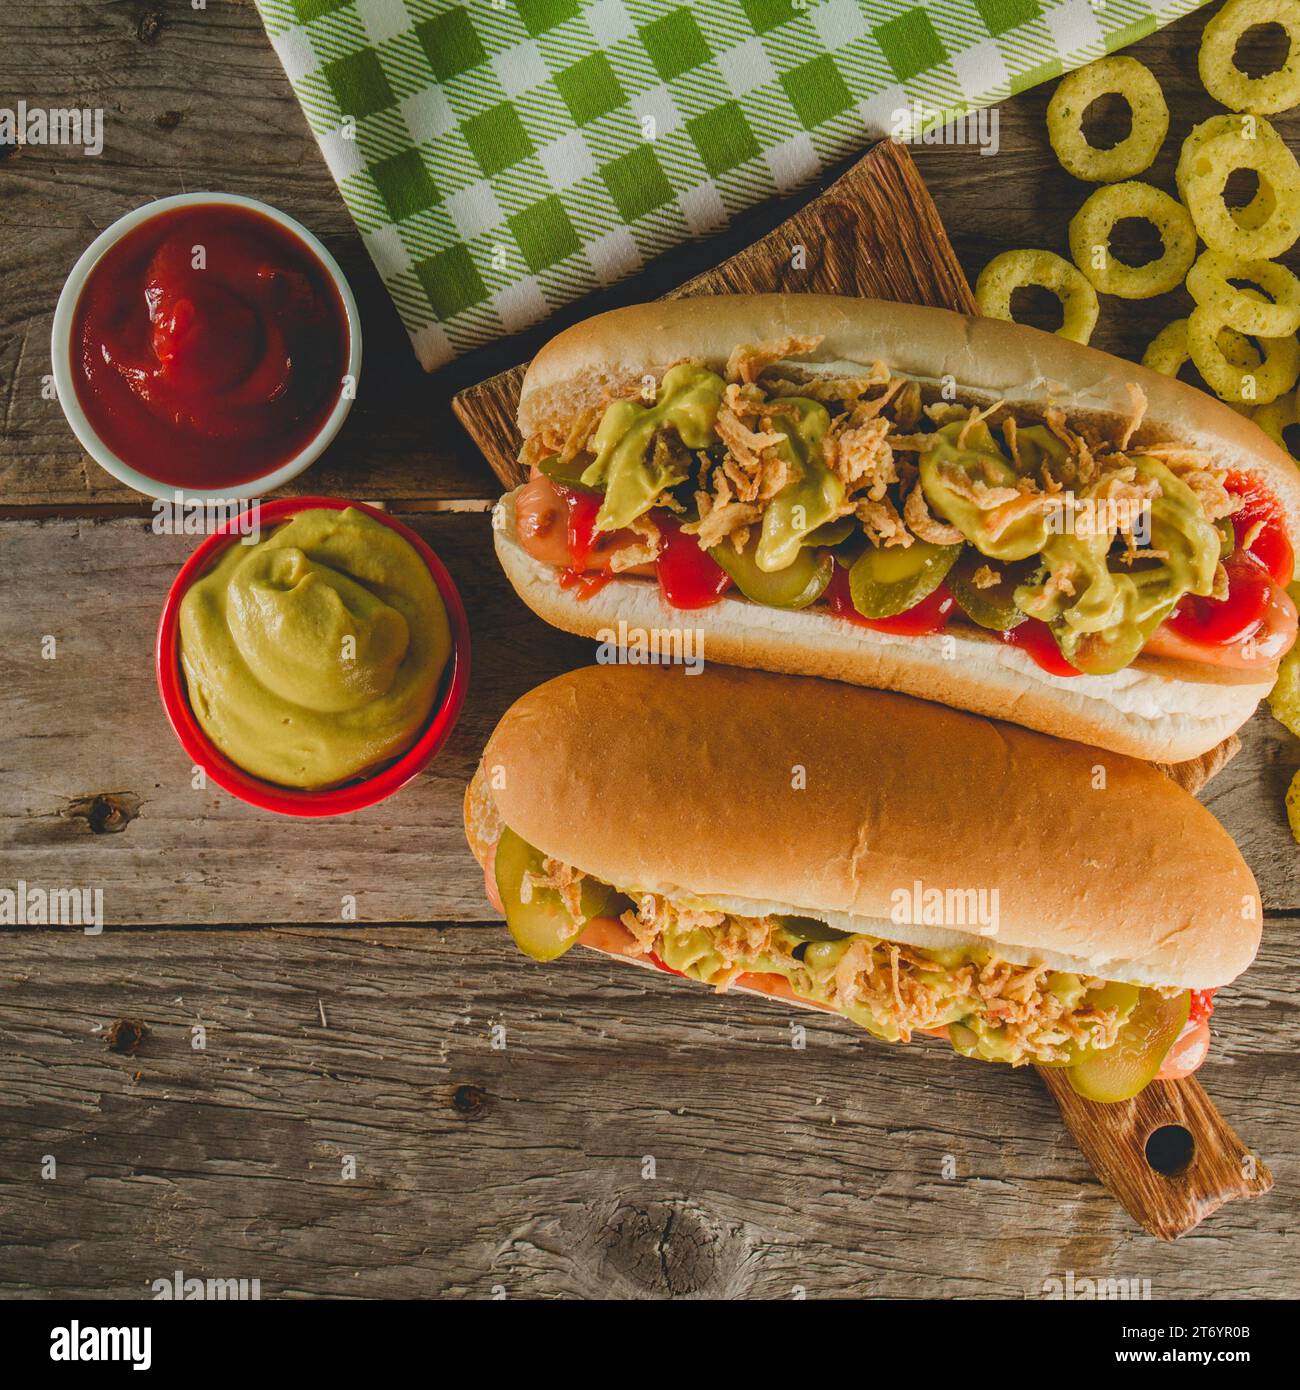 Delicious hot dogs with sauces onion rings Stock Photo